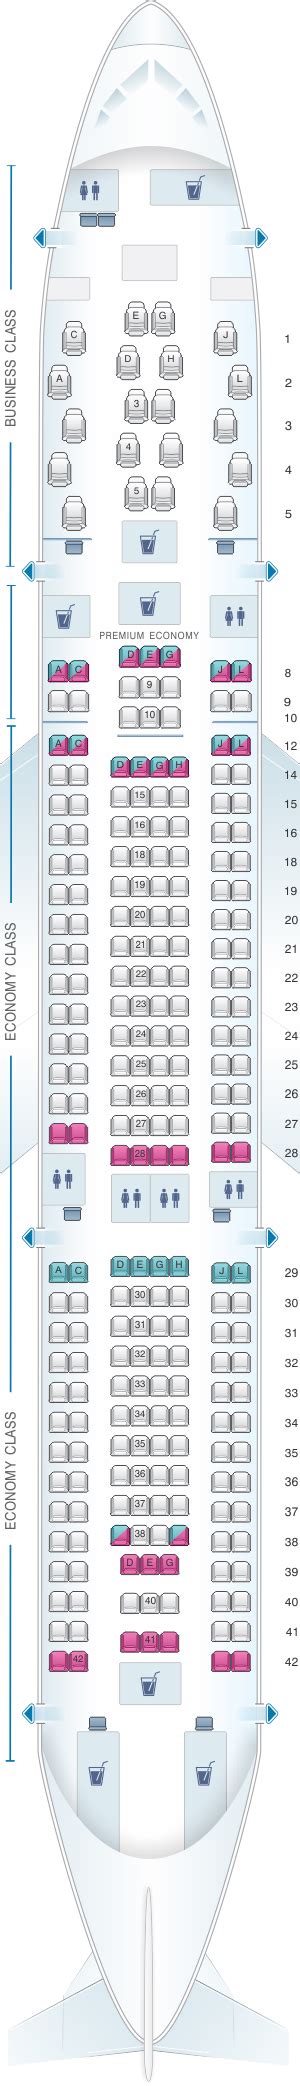 Seat Map Alitalia Airlines Air One Airbus A330 200 Airbus China